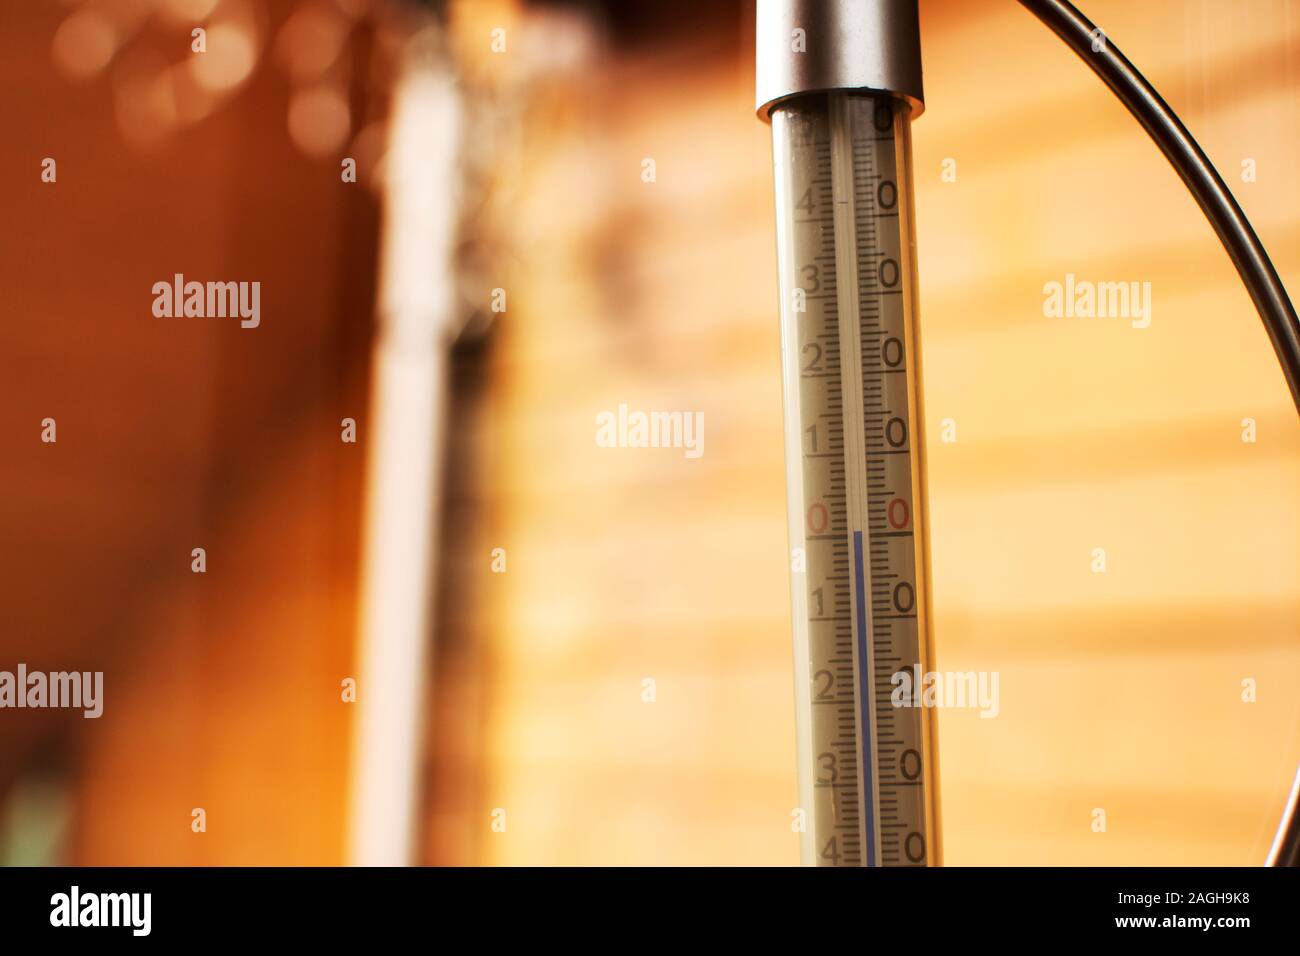 https://c8.alamy.com/comp/2AGH9K8/a-thermometer-fixed-out-of-the-window-shows-that-it-is-zero-degree-celsius-outdoor-2AGH9K8.jpg